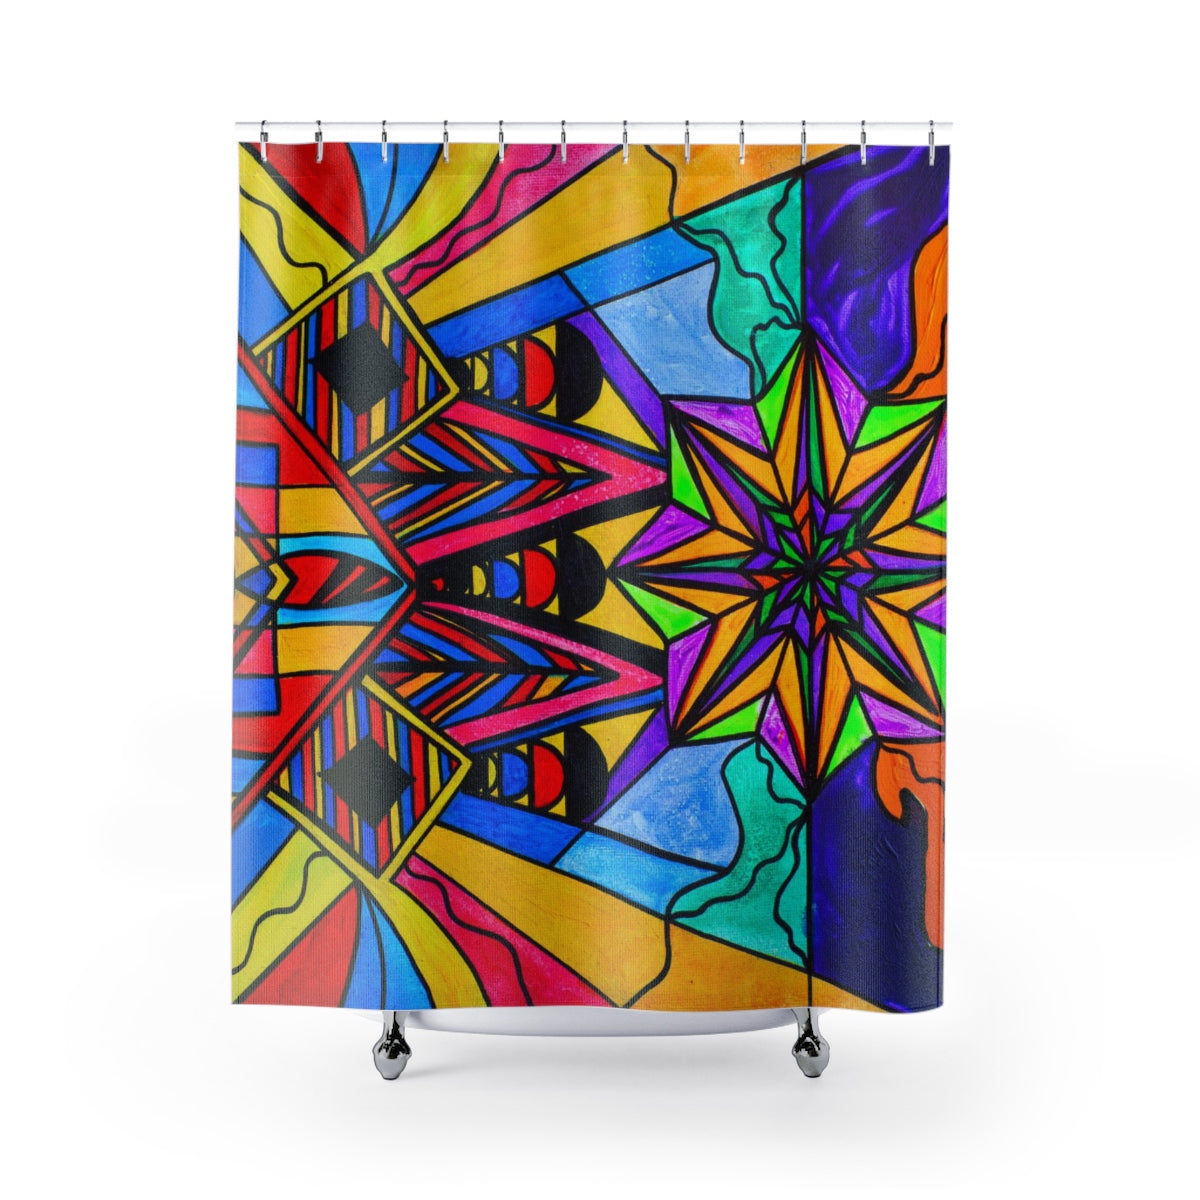 A Change In Perception - Shower Curtains